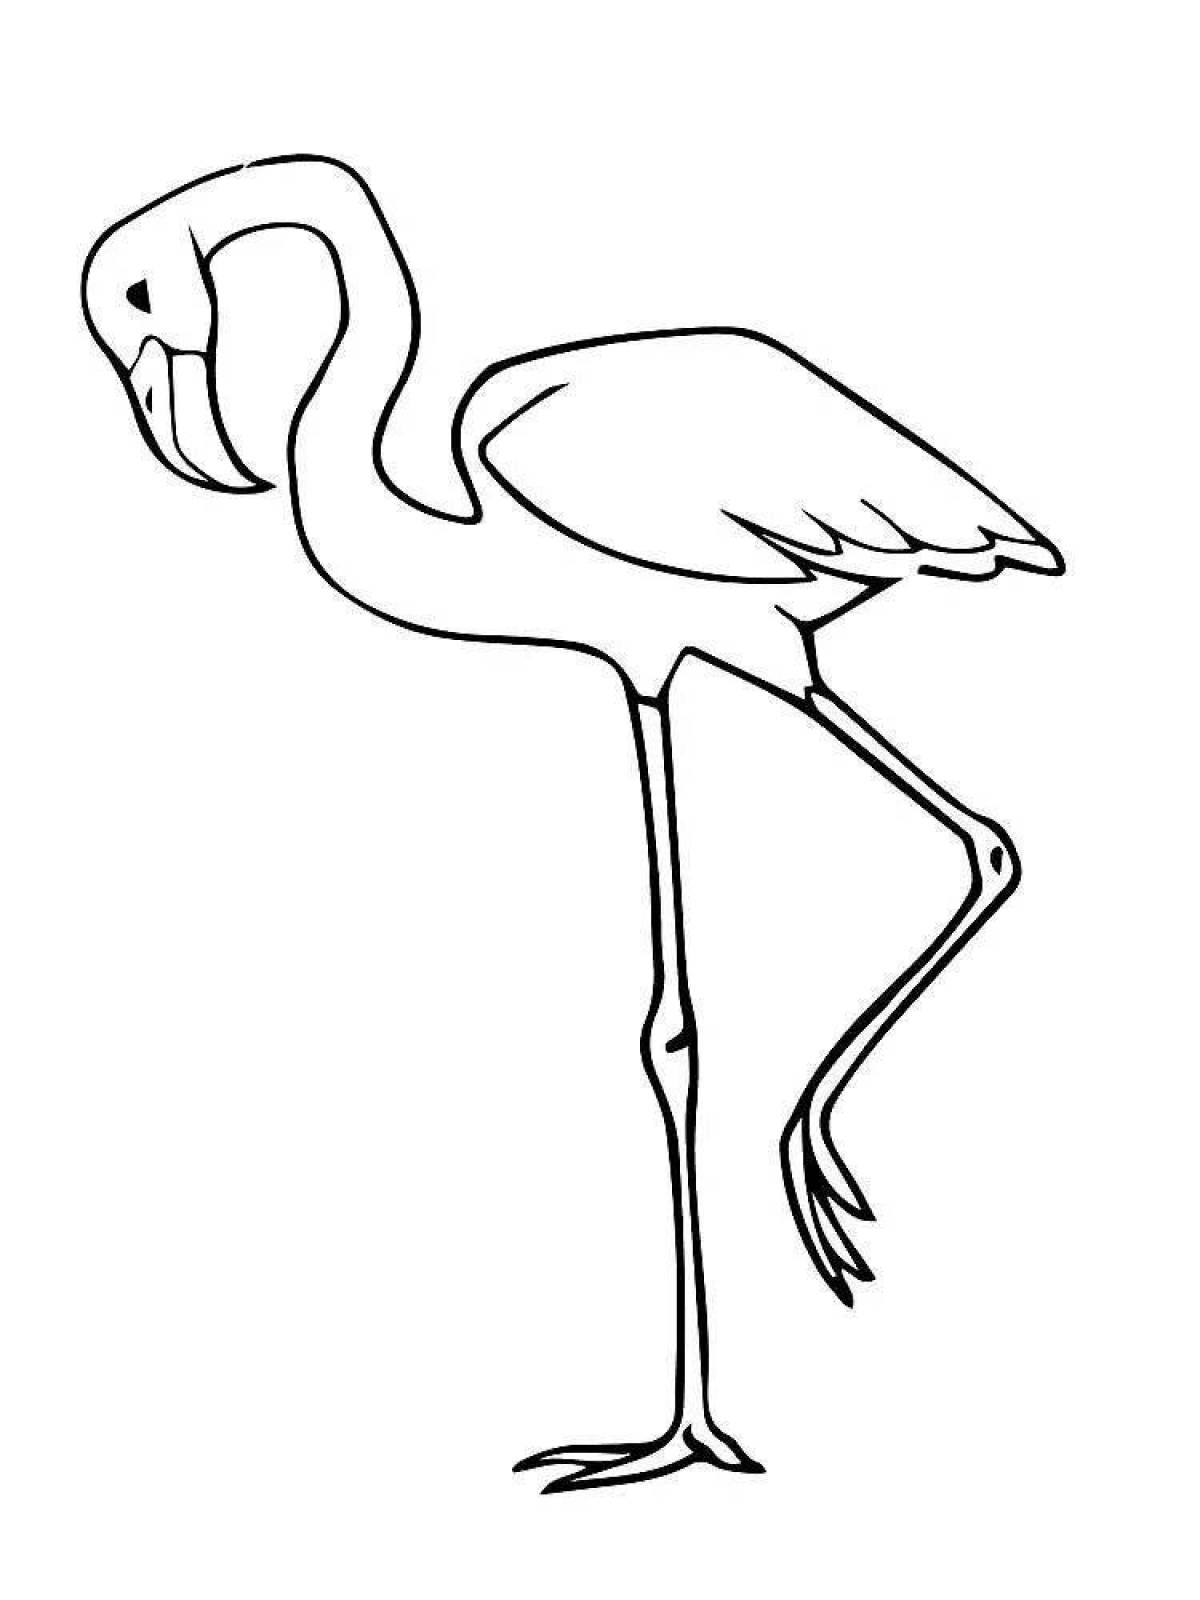 Coloring page of a beckoning pink flamingo